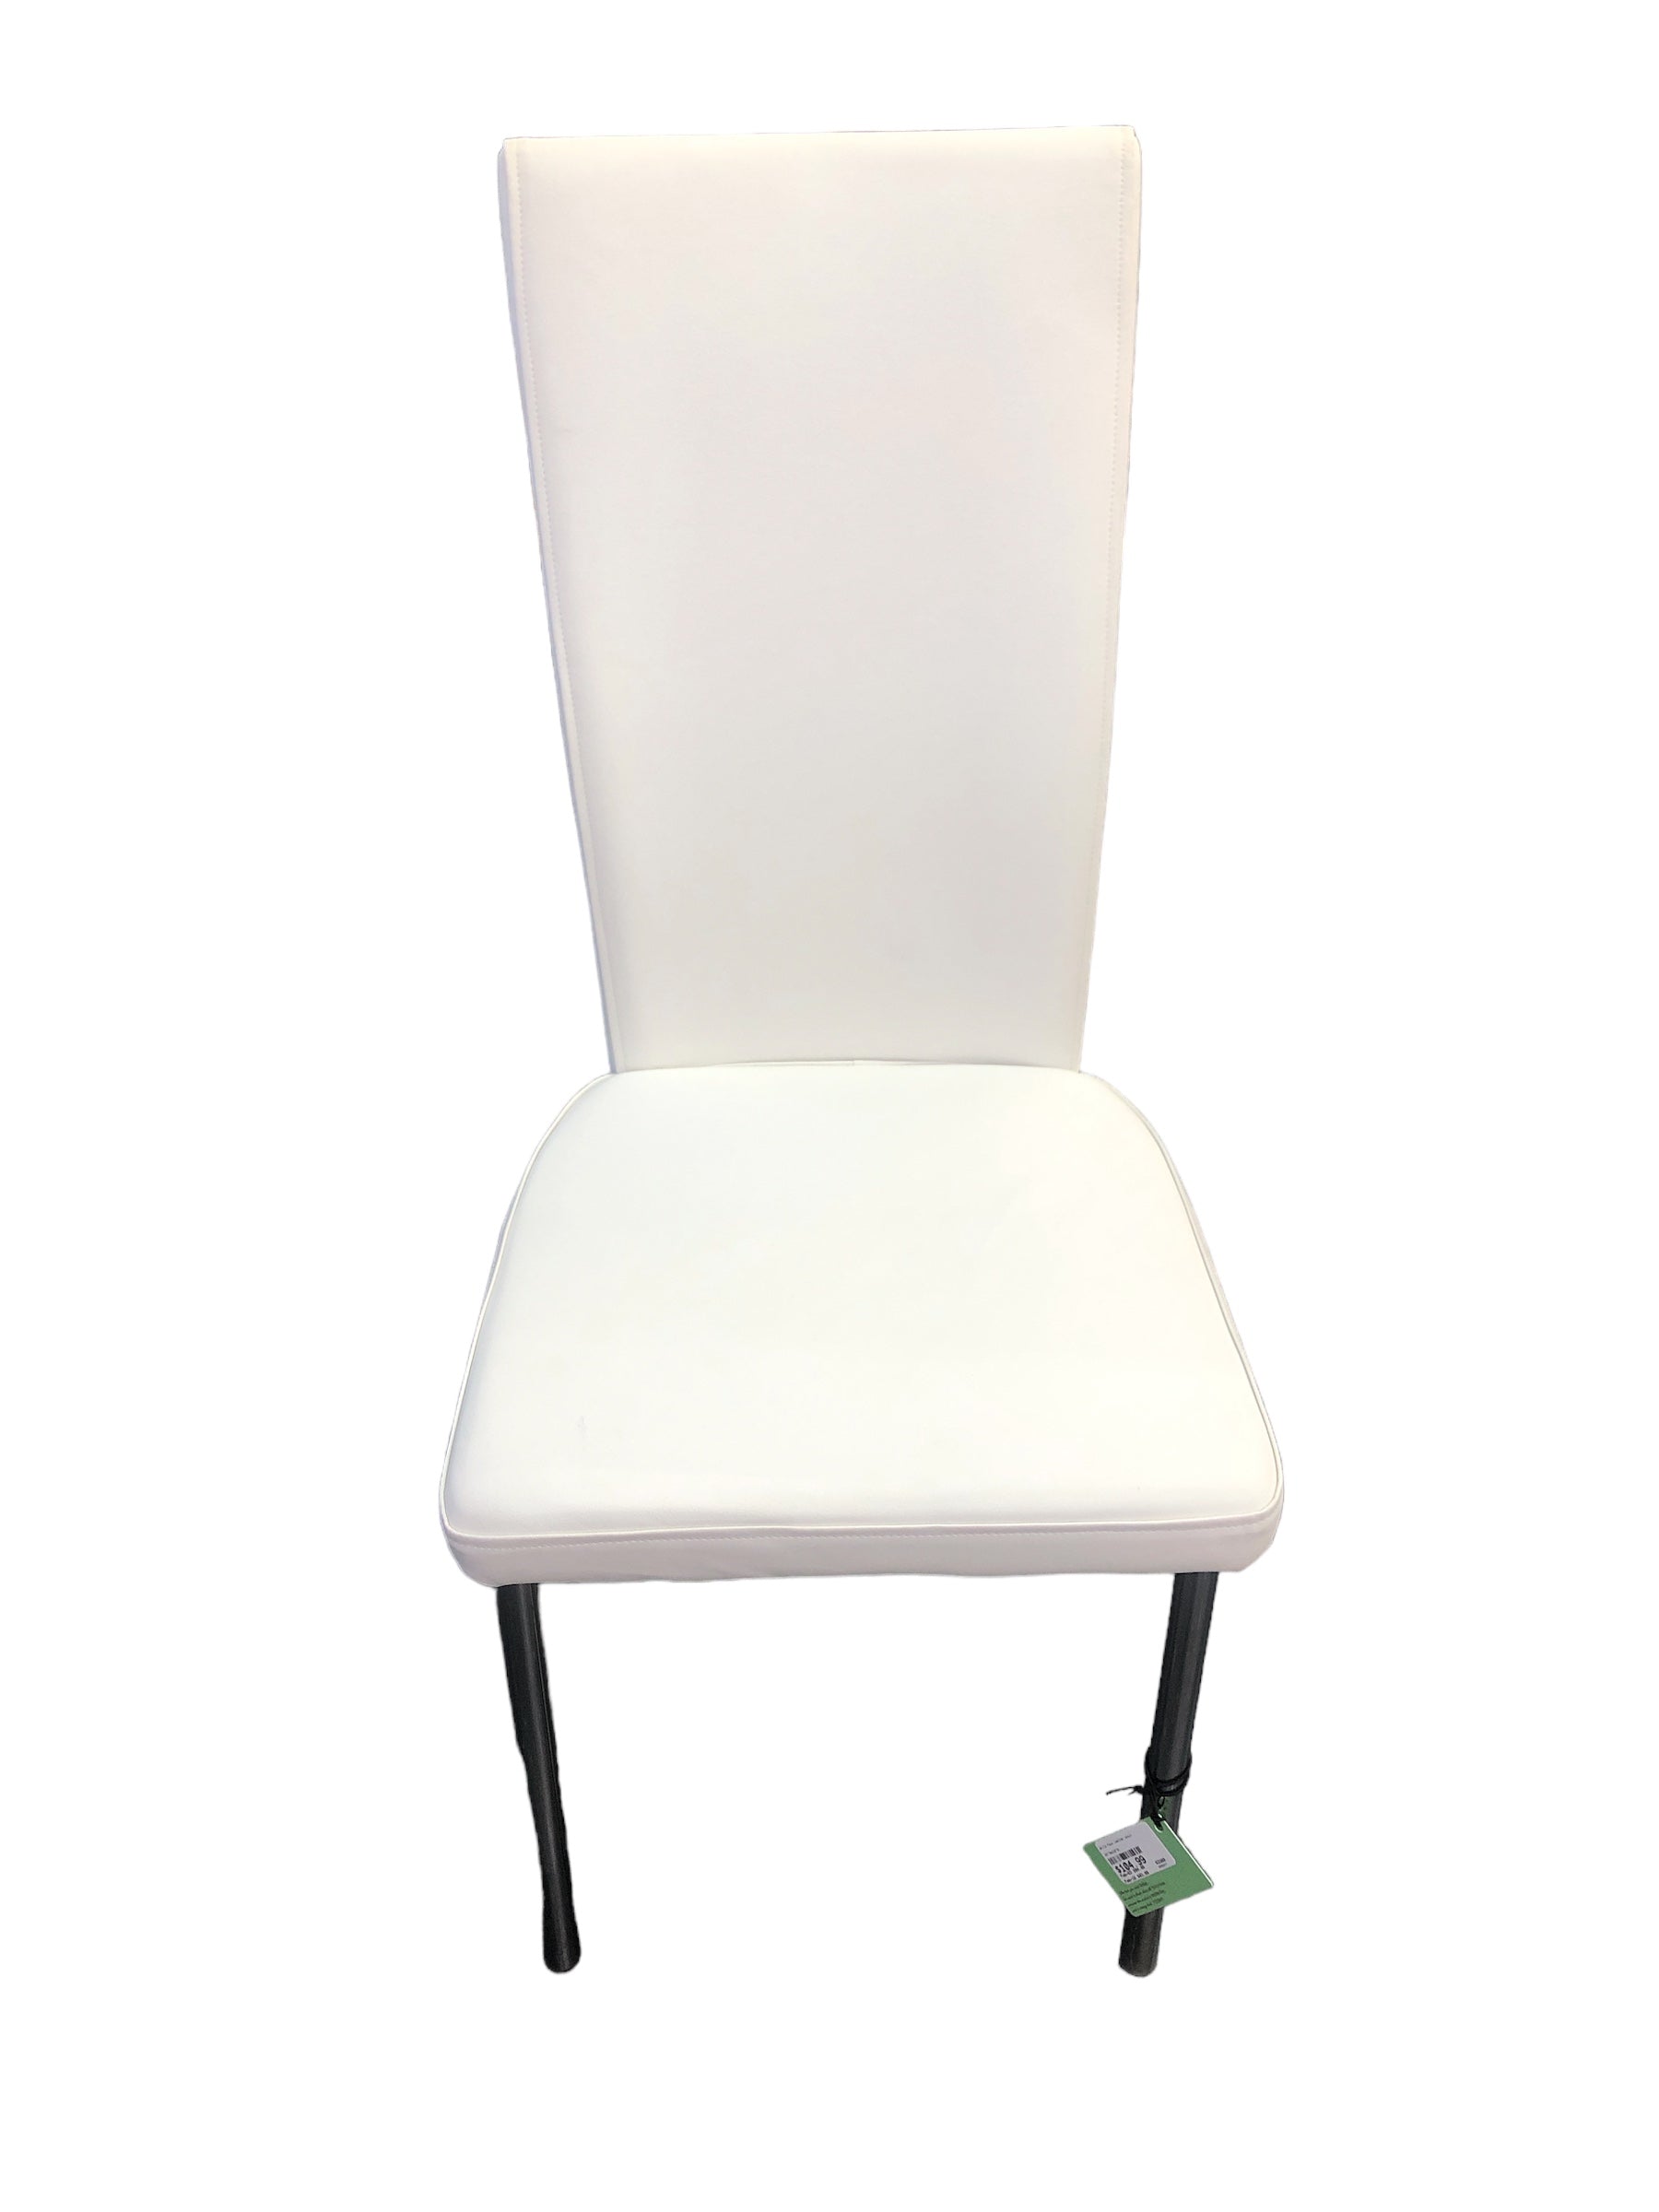 White Faux leather chair